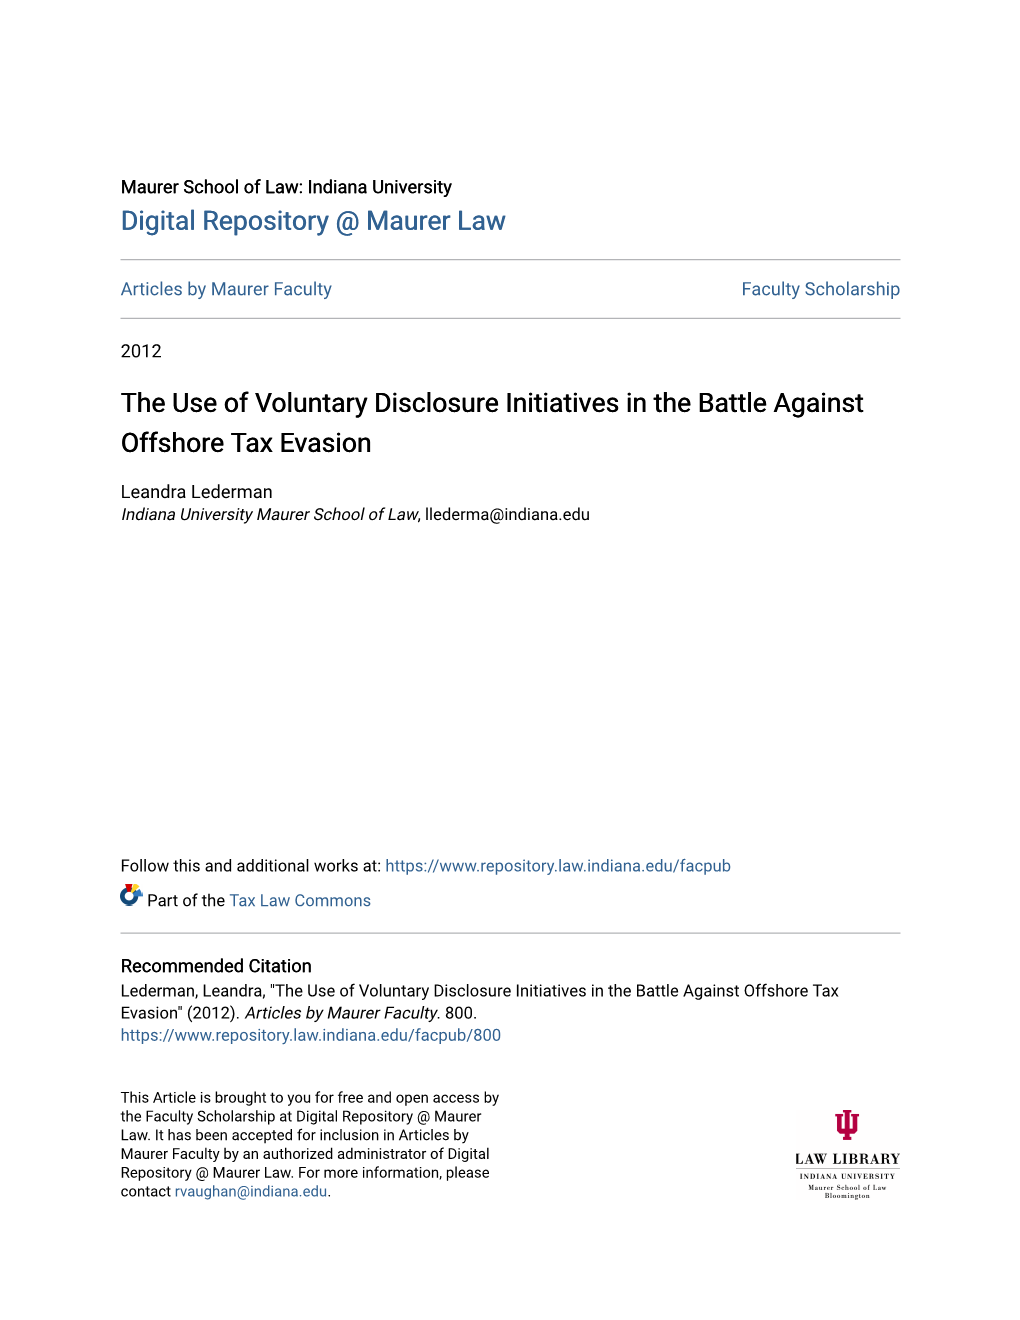 The Use of Voluntary Disclosure Initiatives in the Battle Against Offshore Tax Evasion